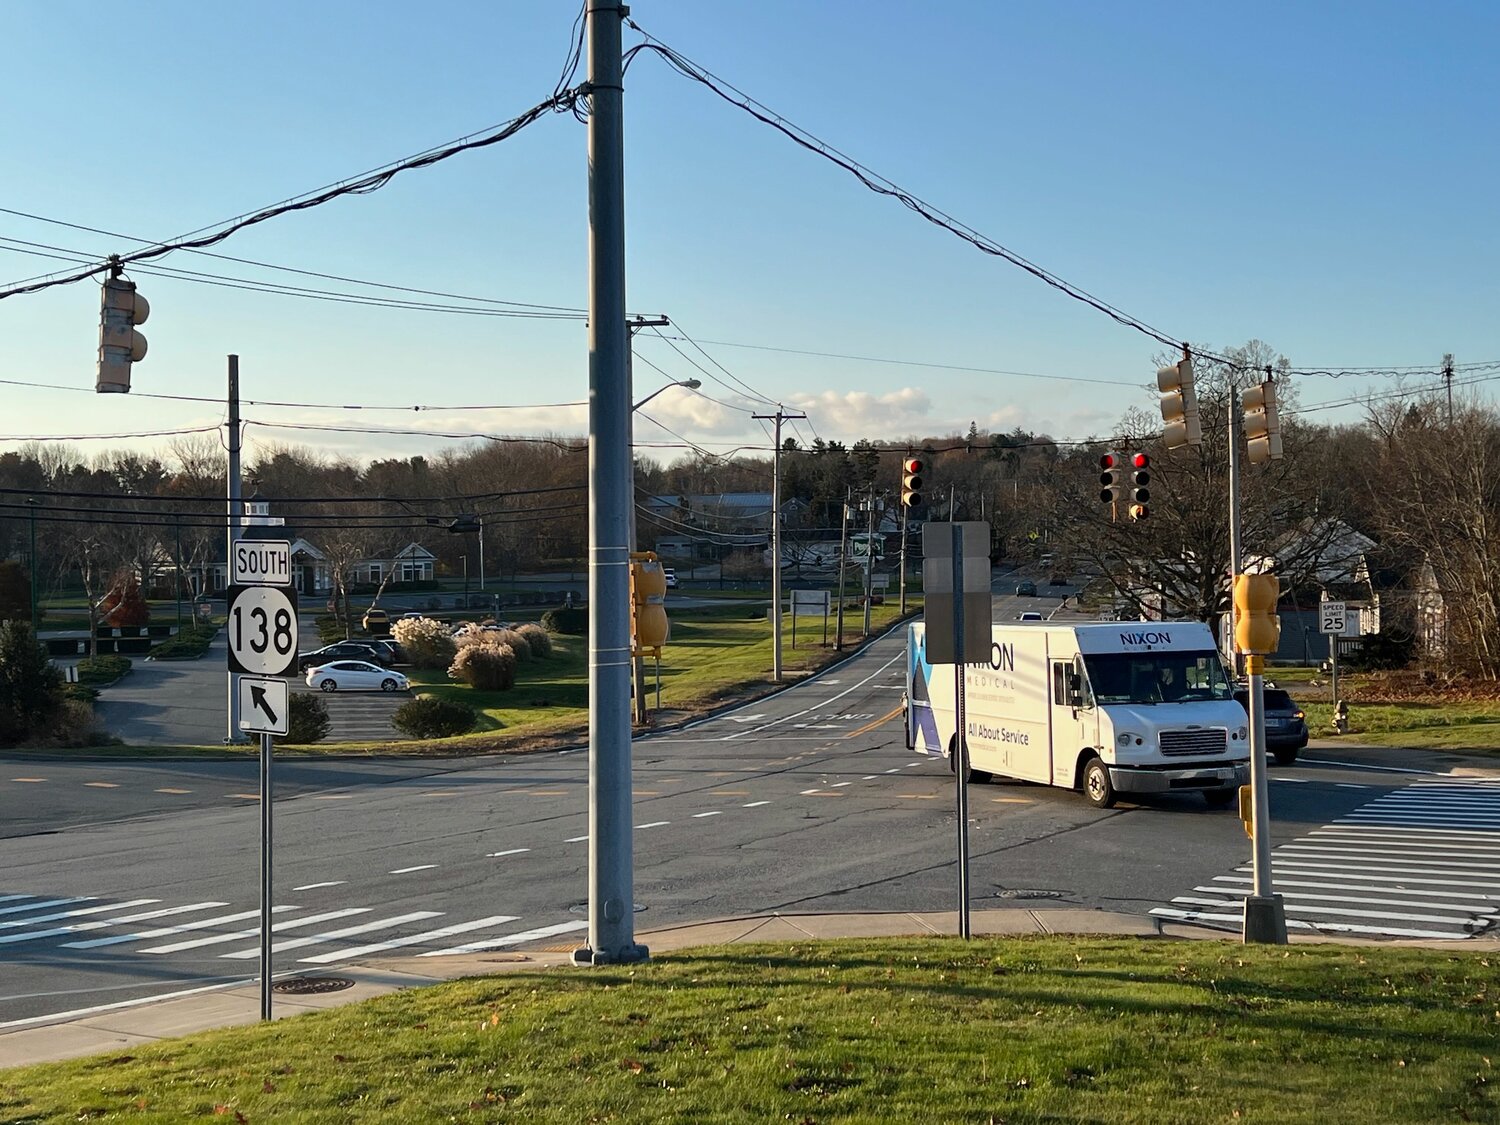 The intersection of East Main Road and Turnpike Avenue (looking south) where the roundabout is being proposed. The main entrance to Clements' Marketplace is at left.